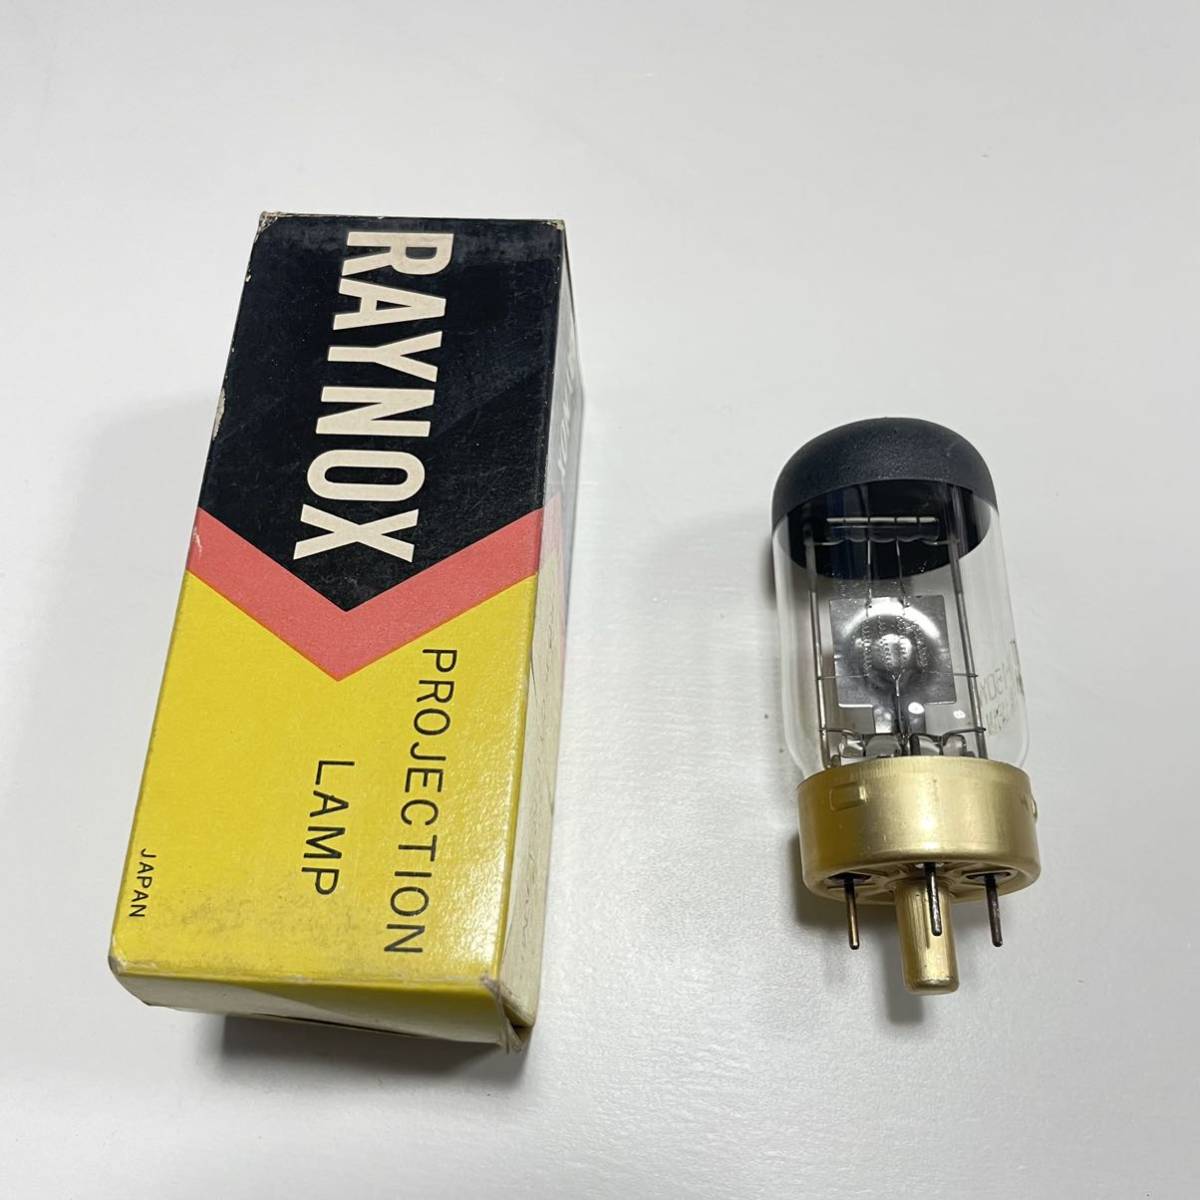 RAYNOX Projection Lamp FOR 8mm MOVIE PROJECTOR 100V 150W 映写機ランプ ⑥_画像1